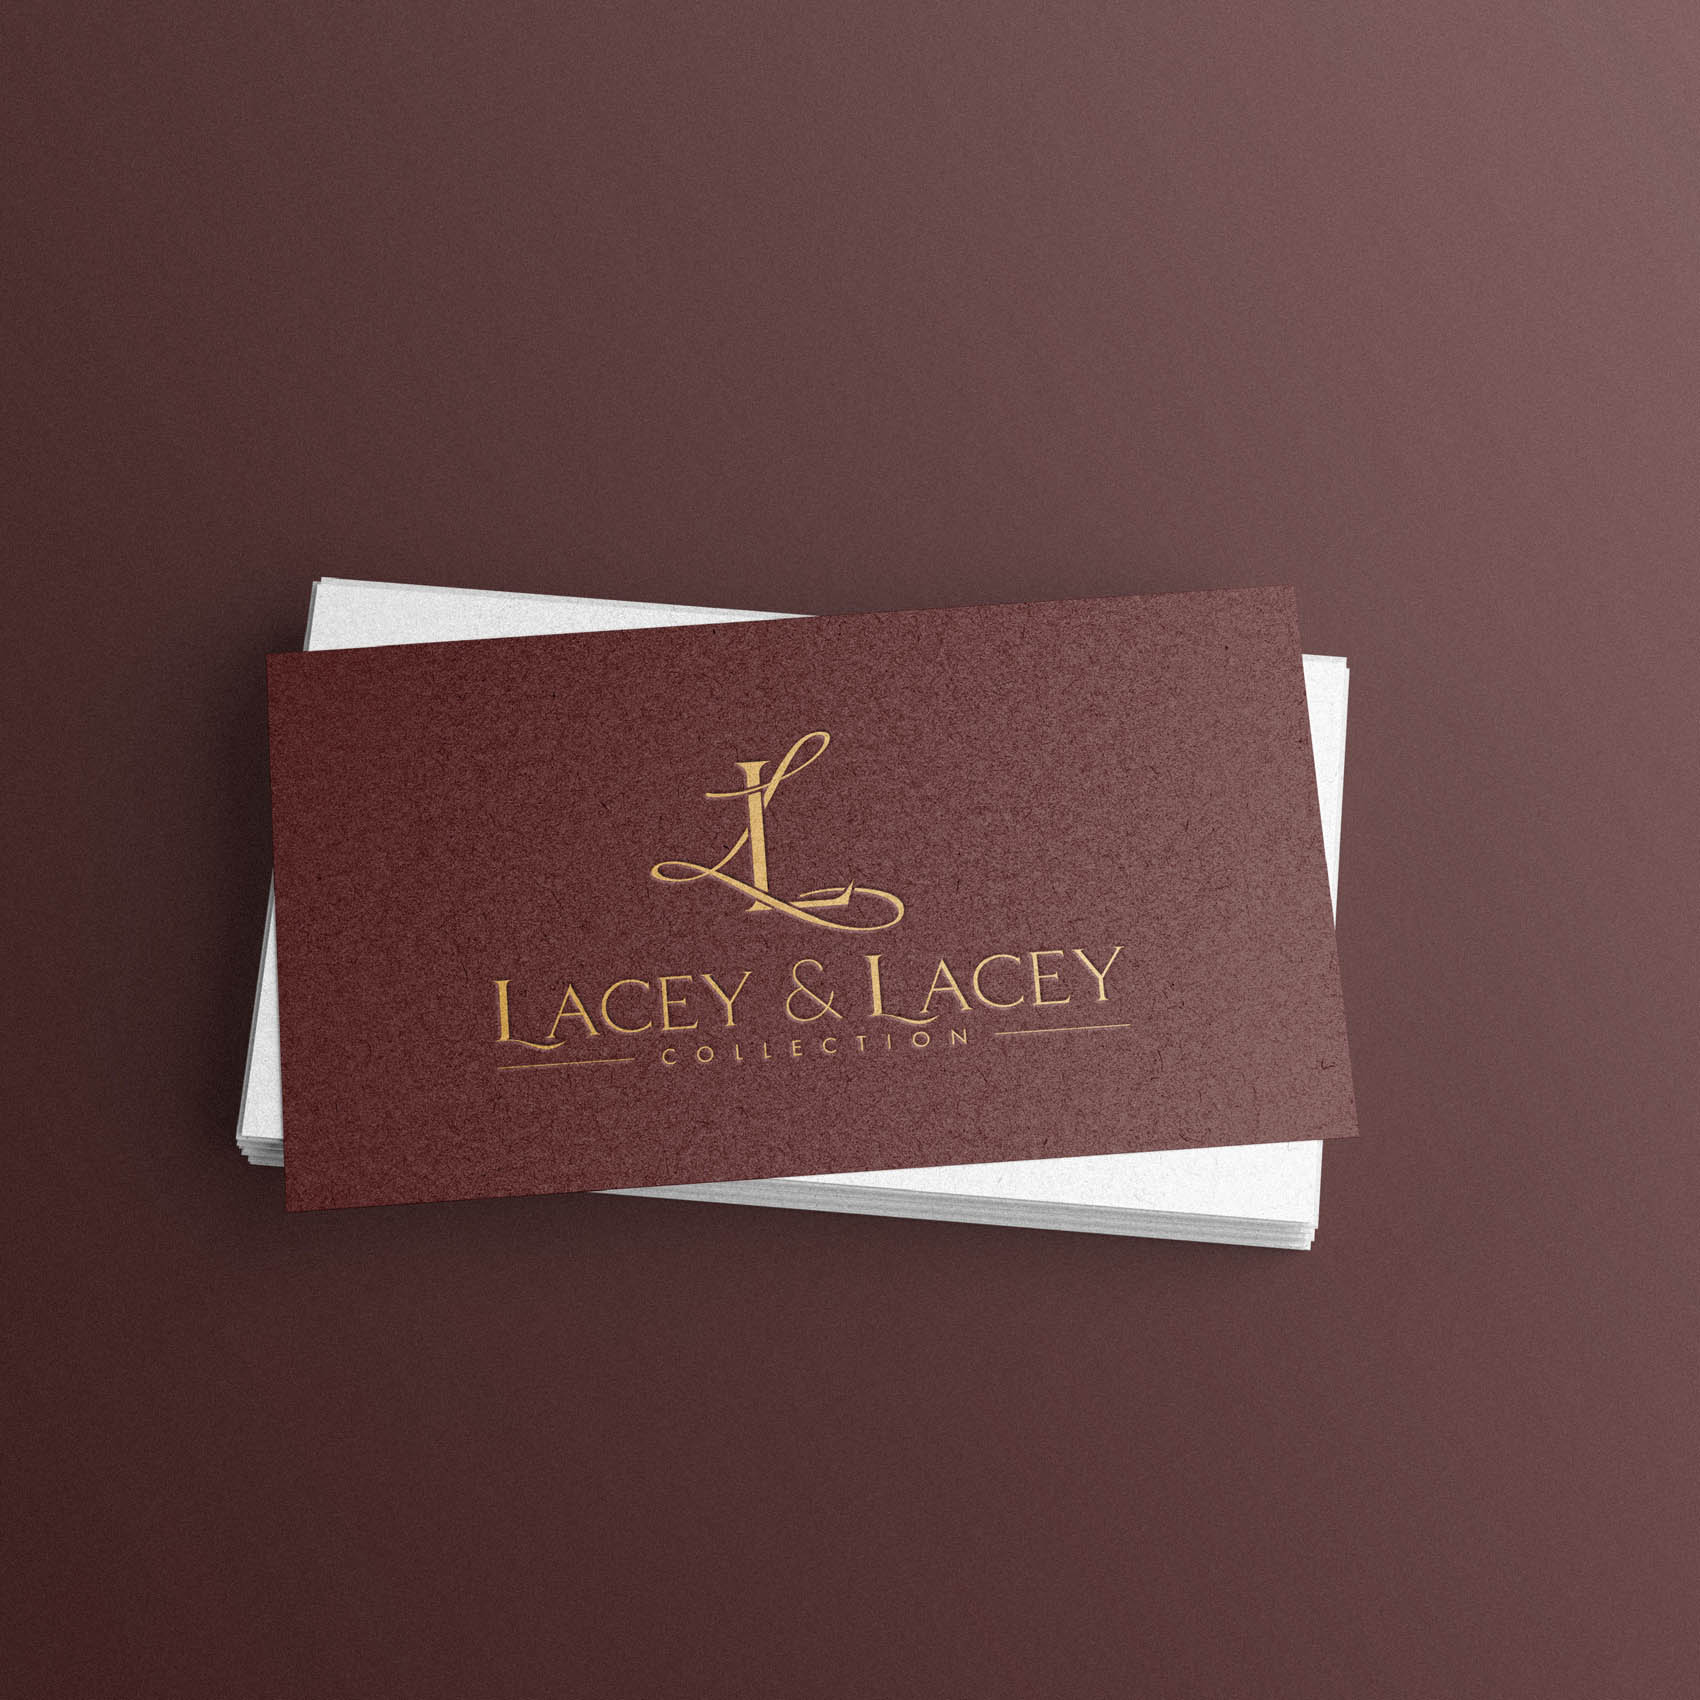 Lacey & Lacey - Luxury Candle Packaging Logo & Brand Identity12